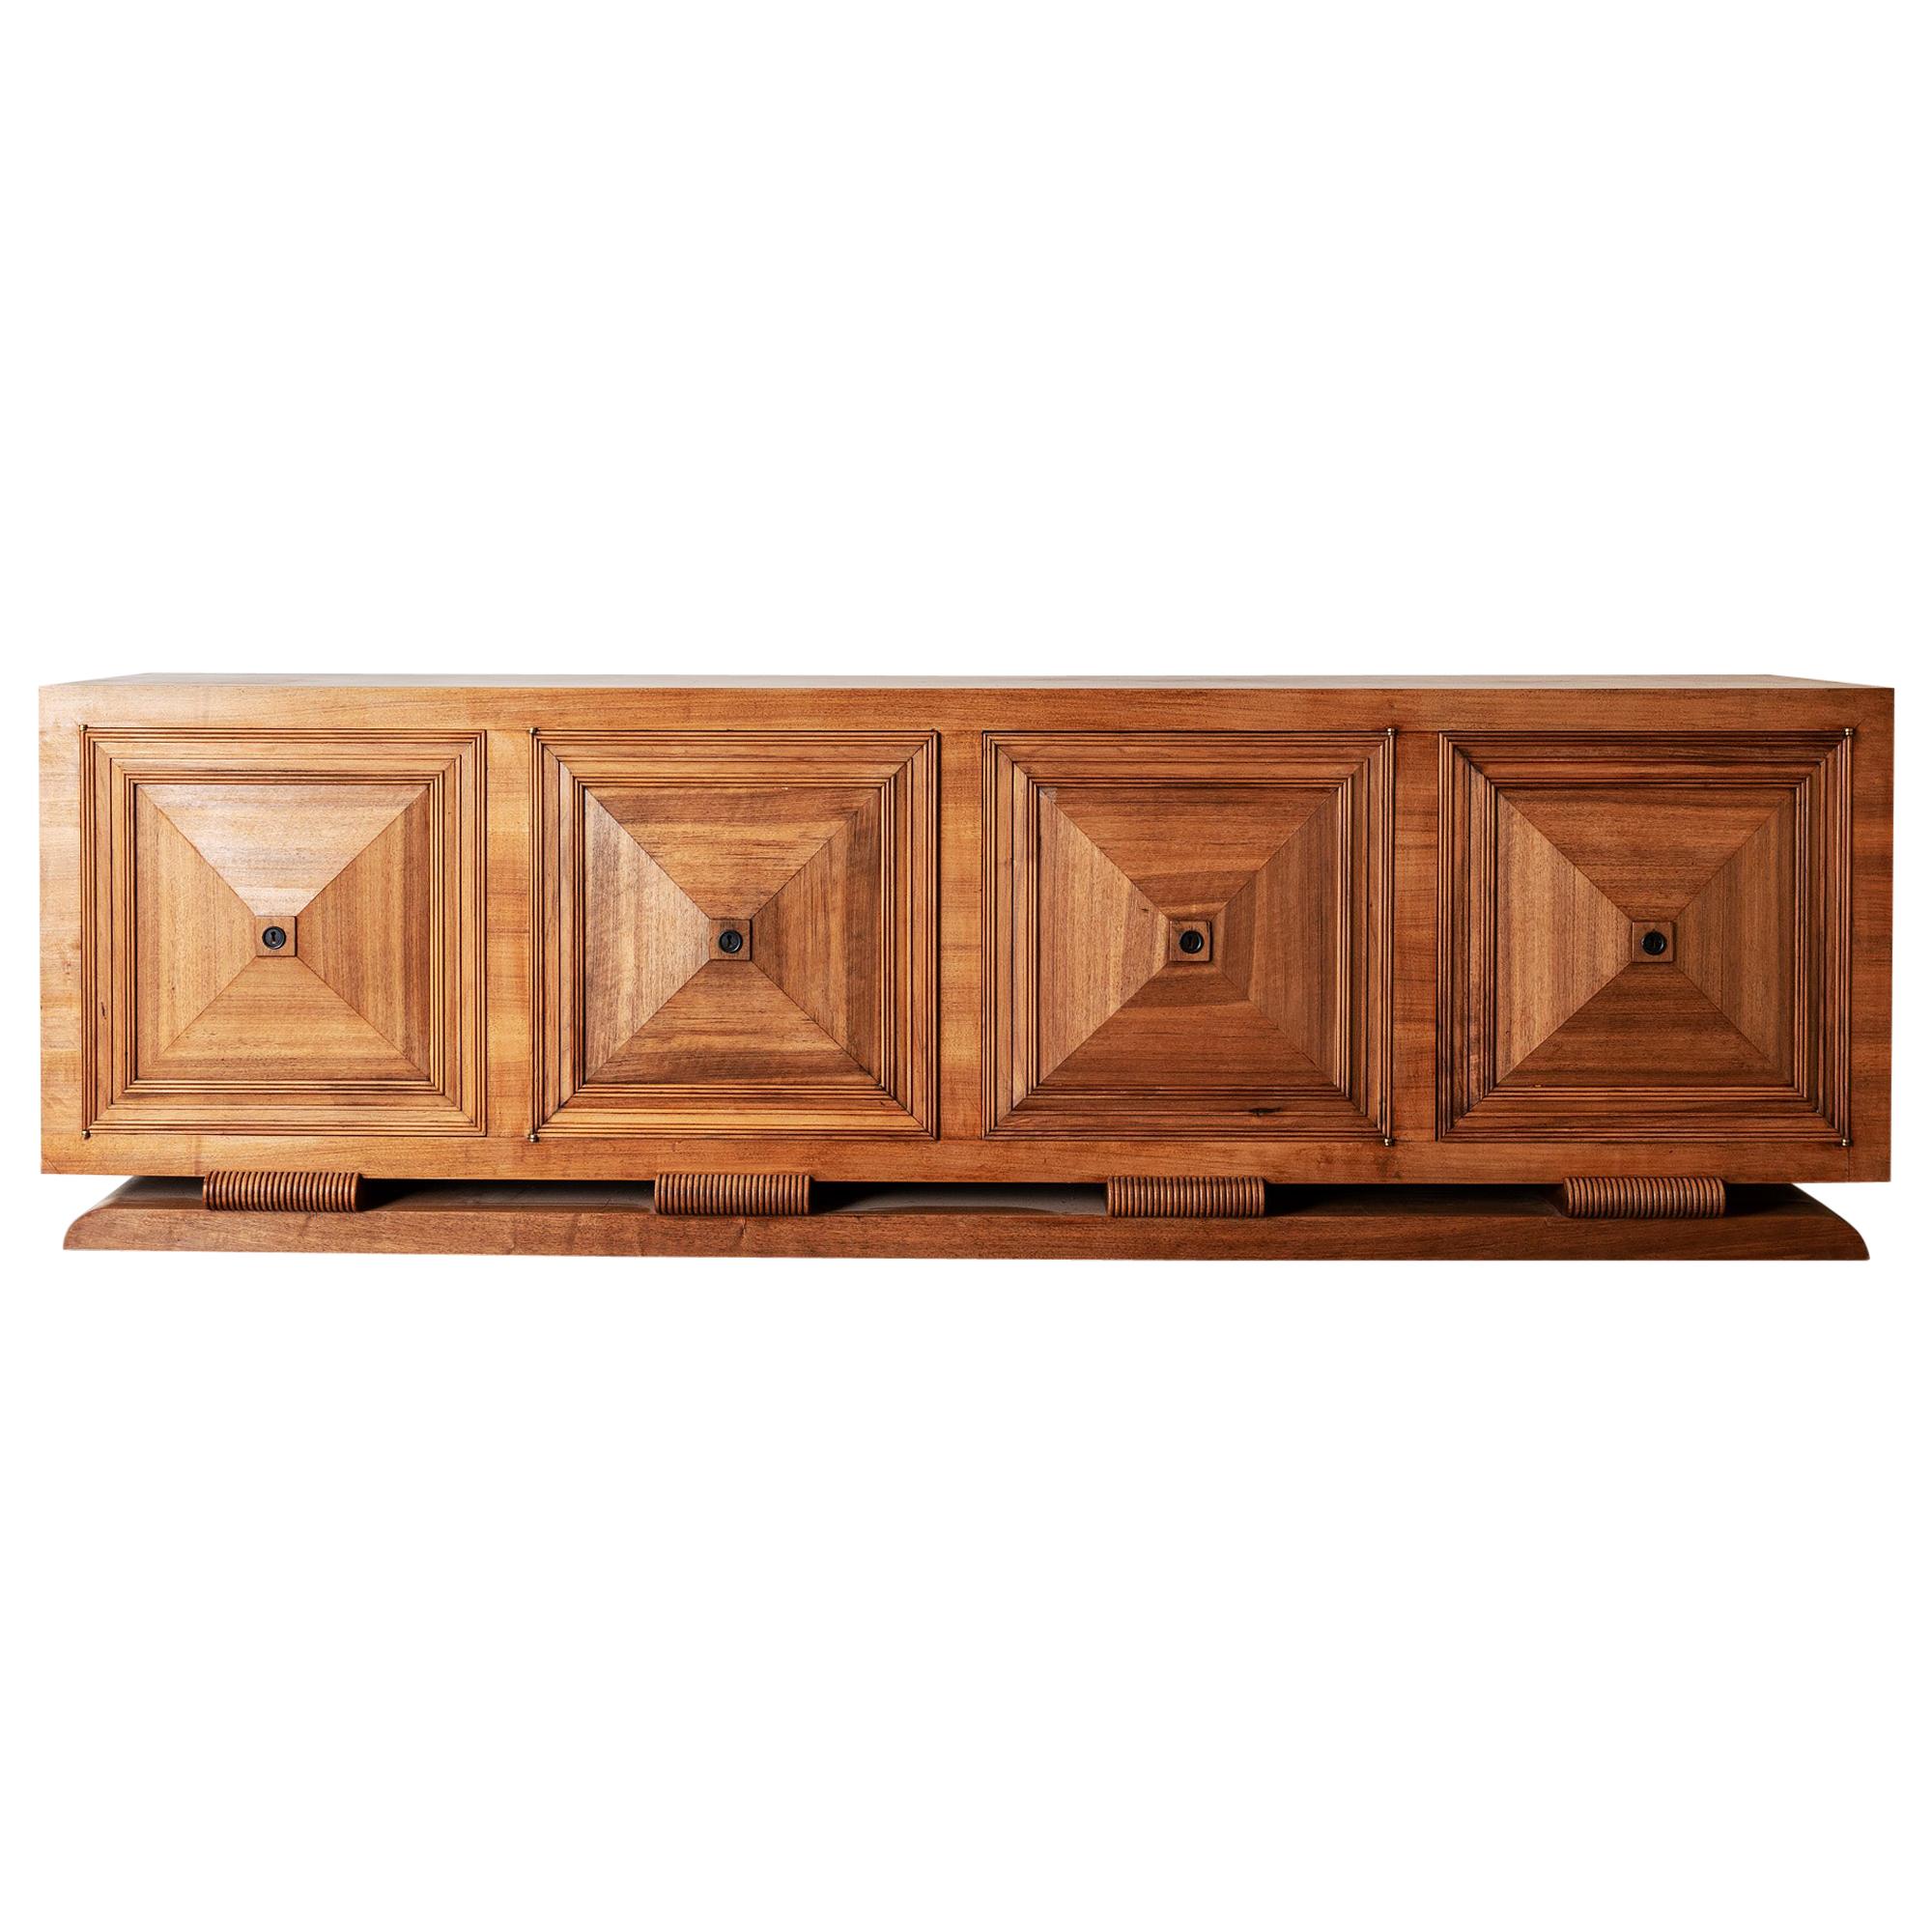 Stately French Late Deco Credenza in Walnut, 1940s